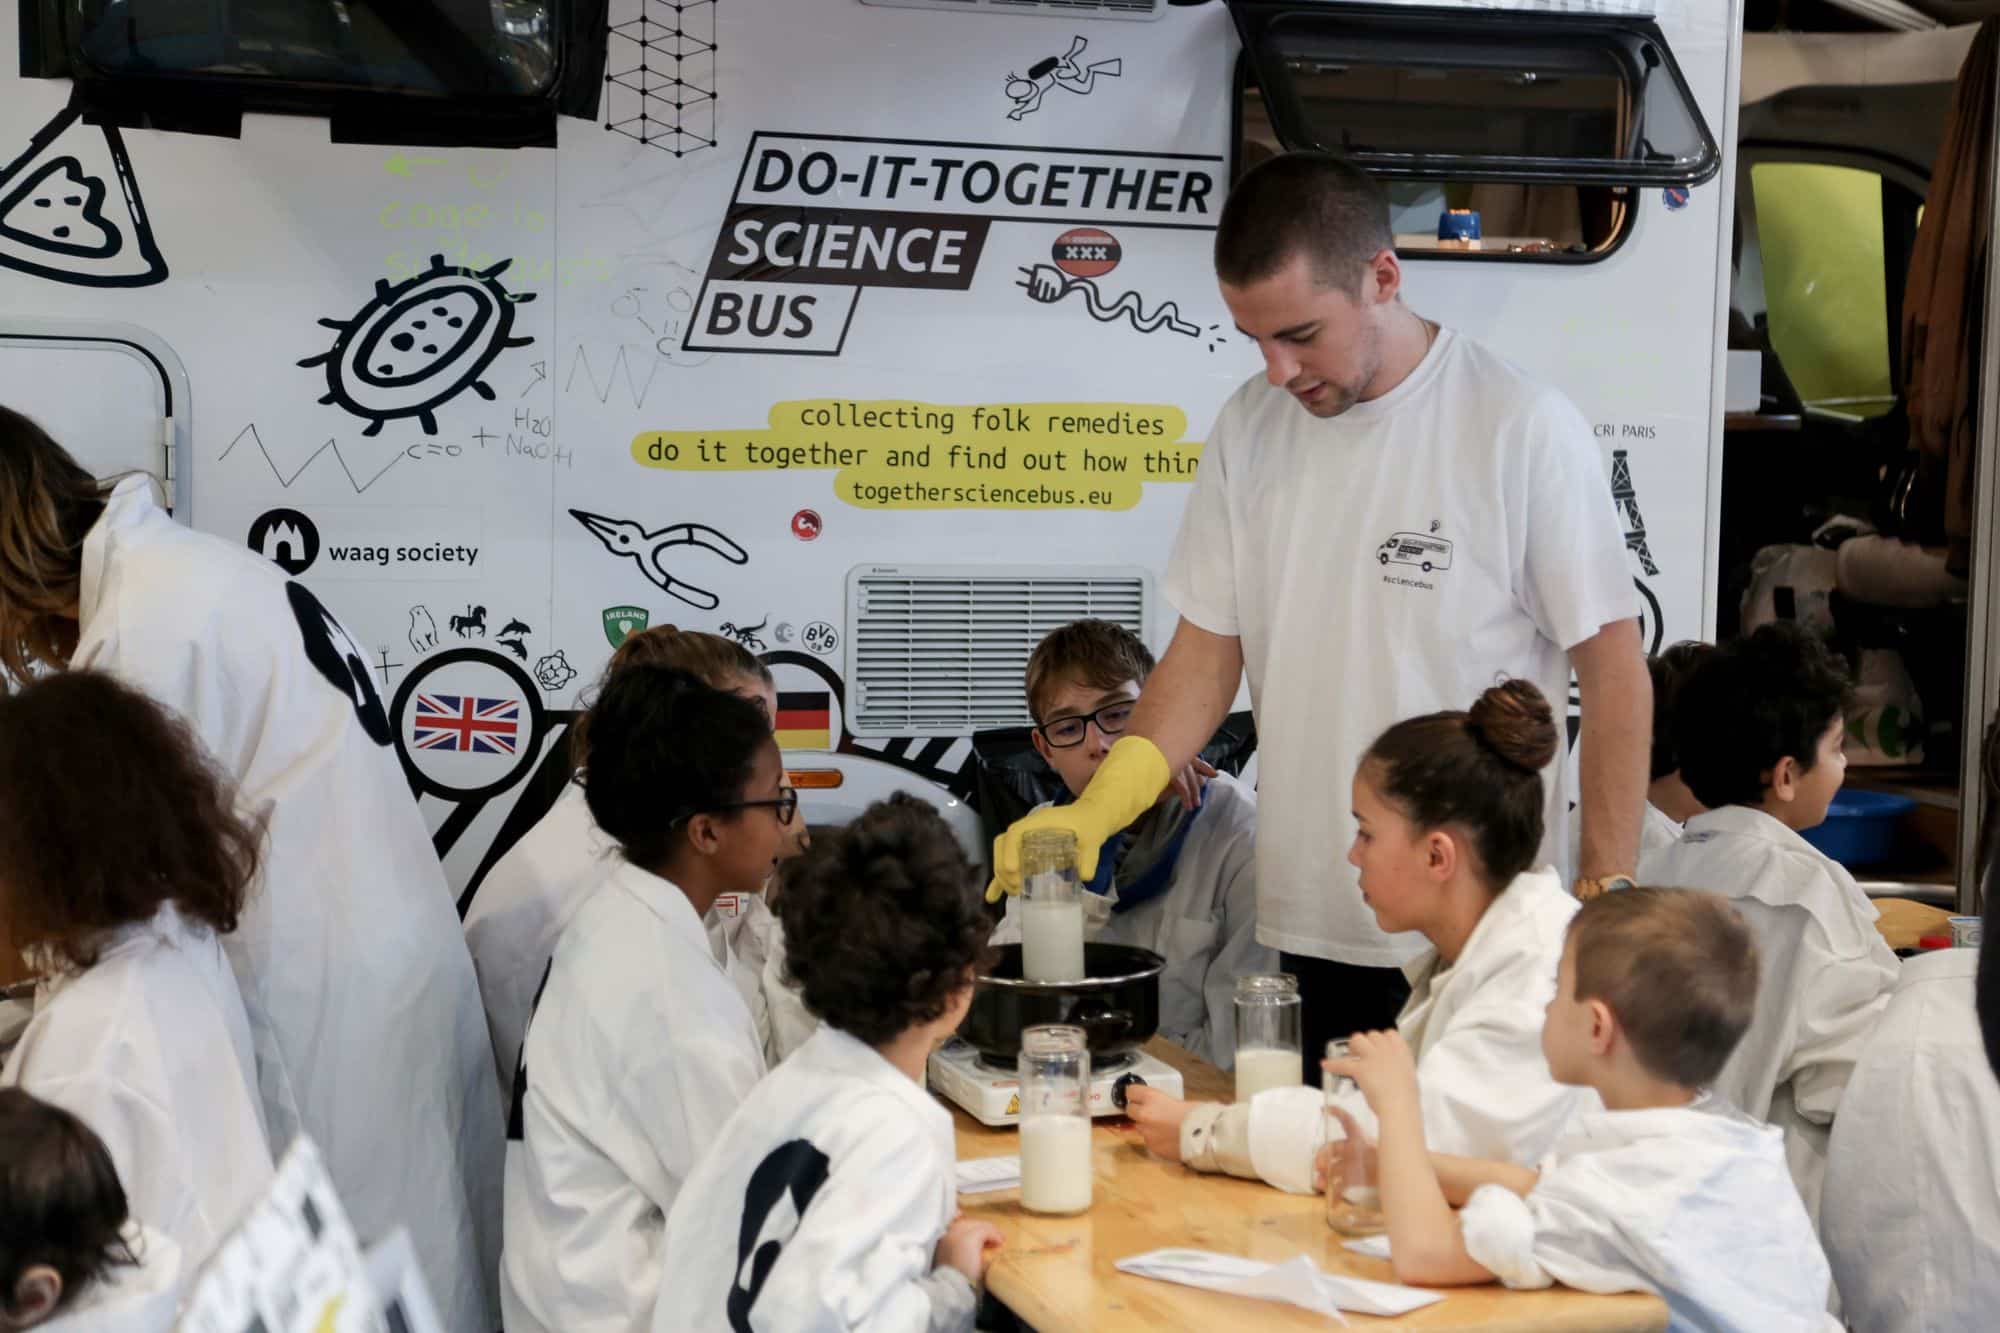 Science Bus 2 Citizen science: empowering communities to address the challenges of our time